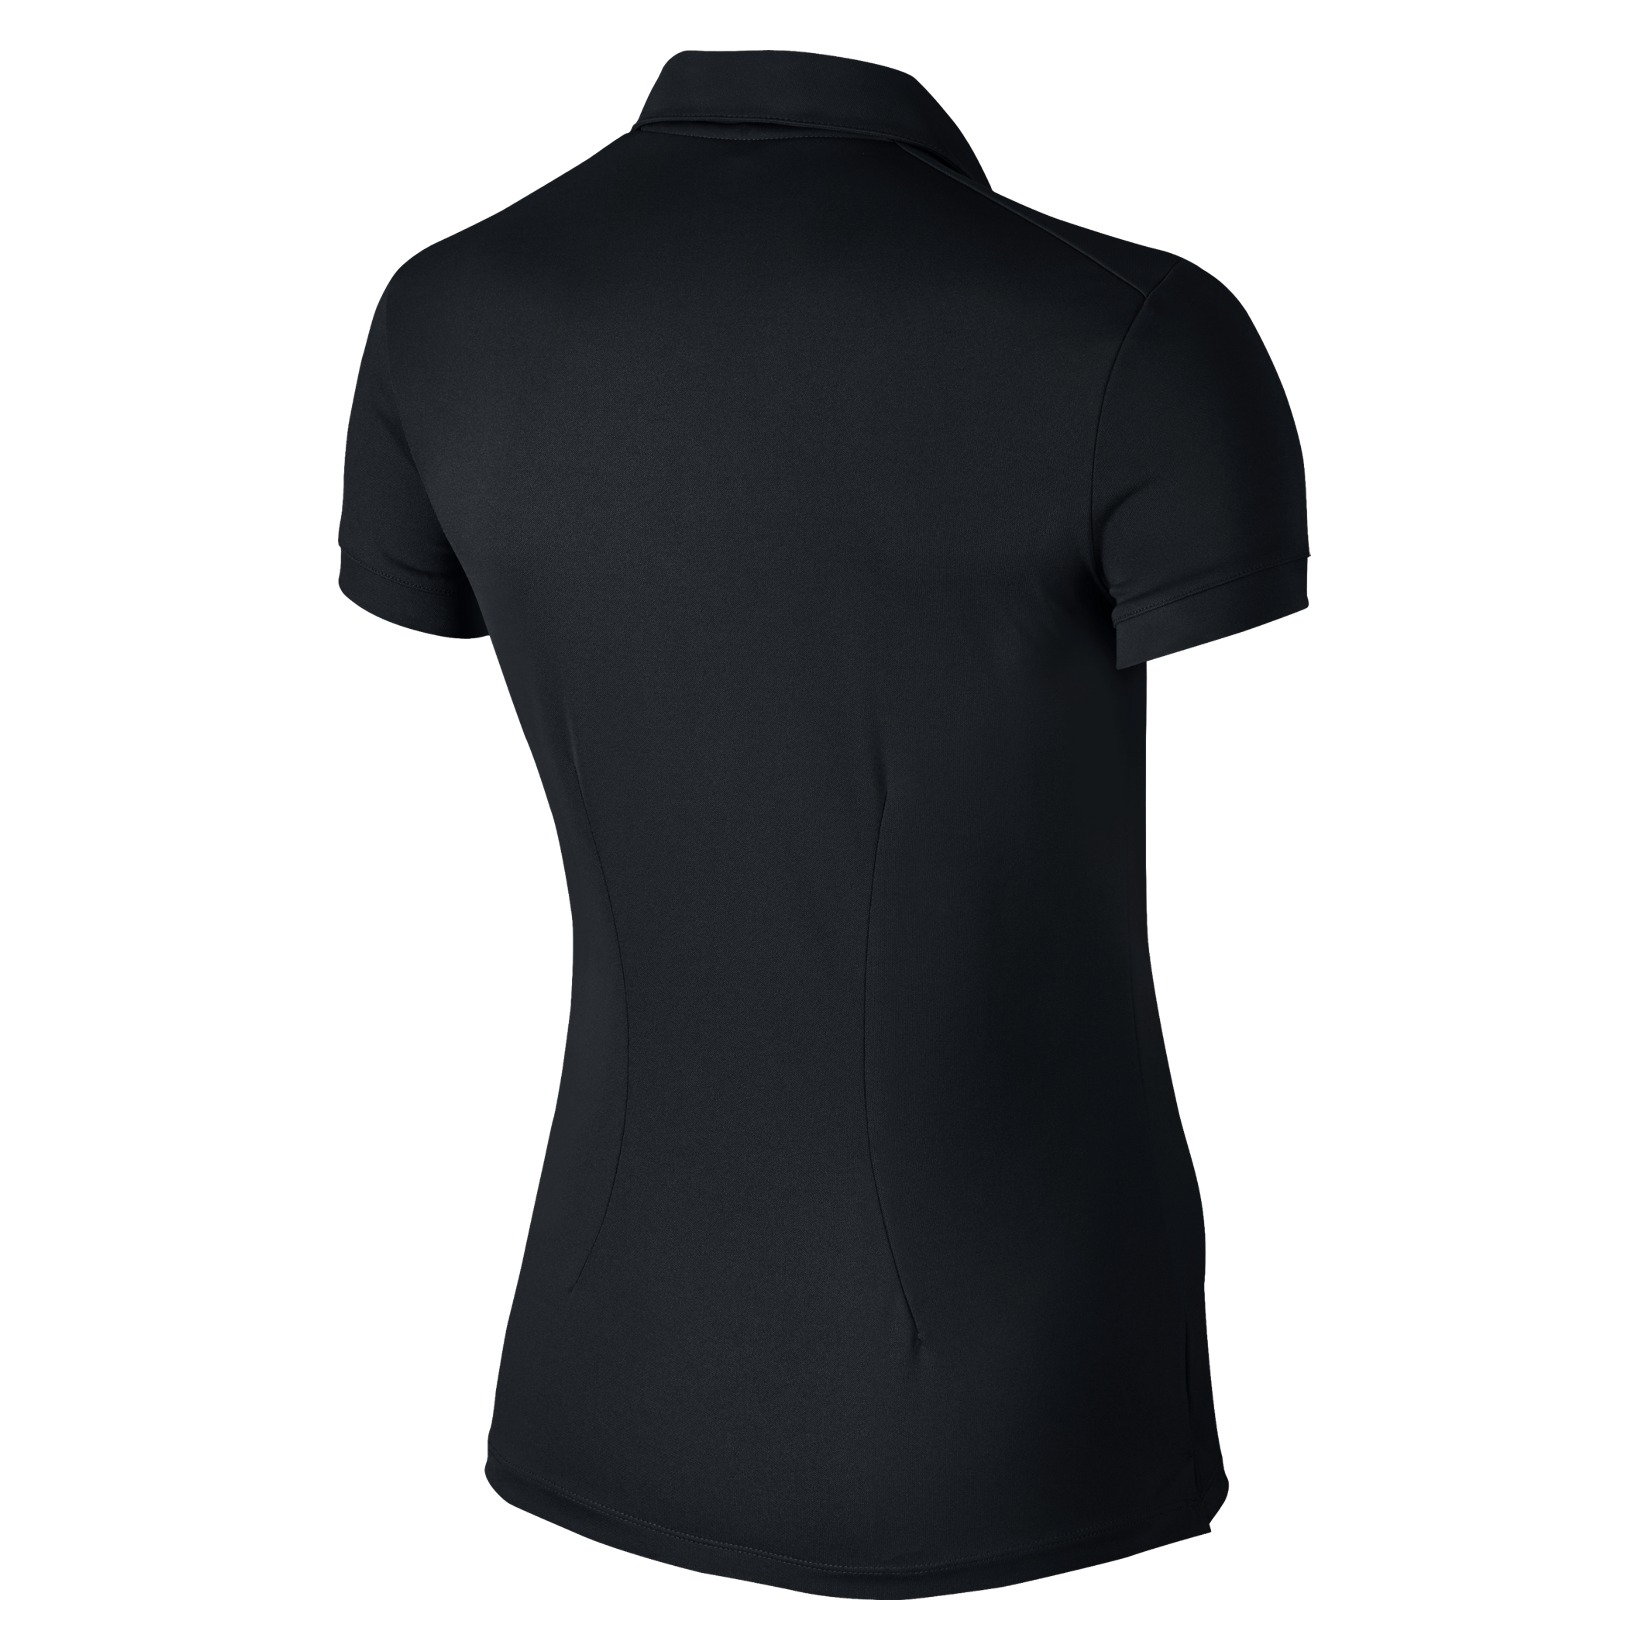 Nike Womens VICTORY SOLID POLO